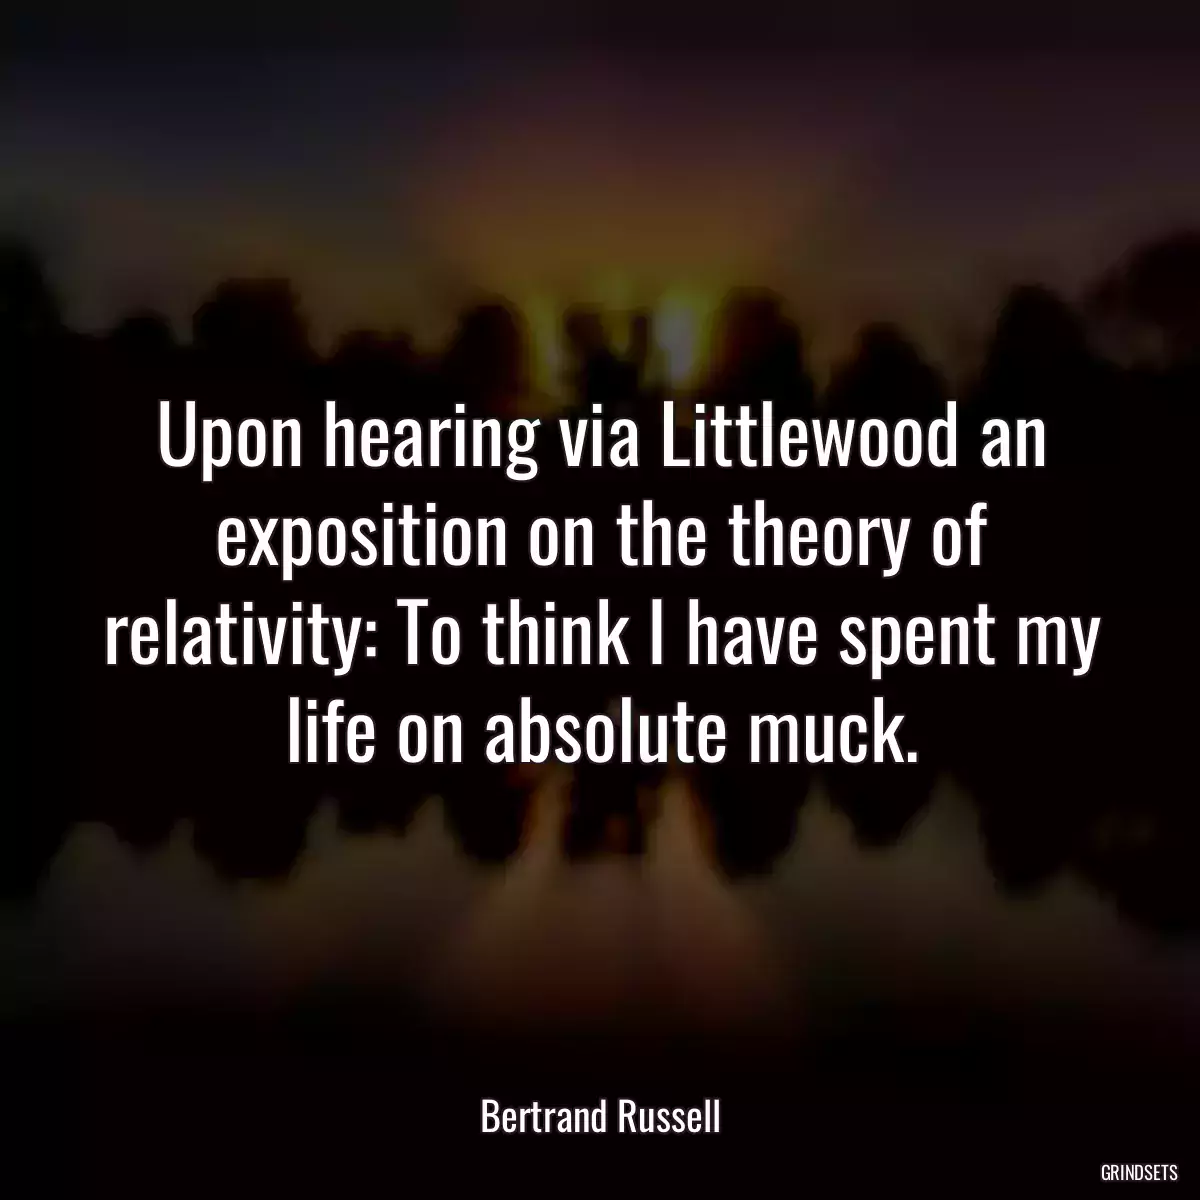 Upon hearing via Littlewood an exposition on the theory of relativity: To think I have spent my life on absolute muck.